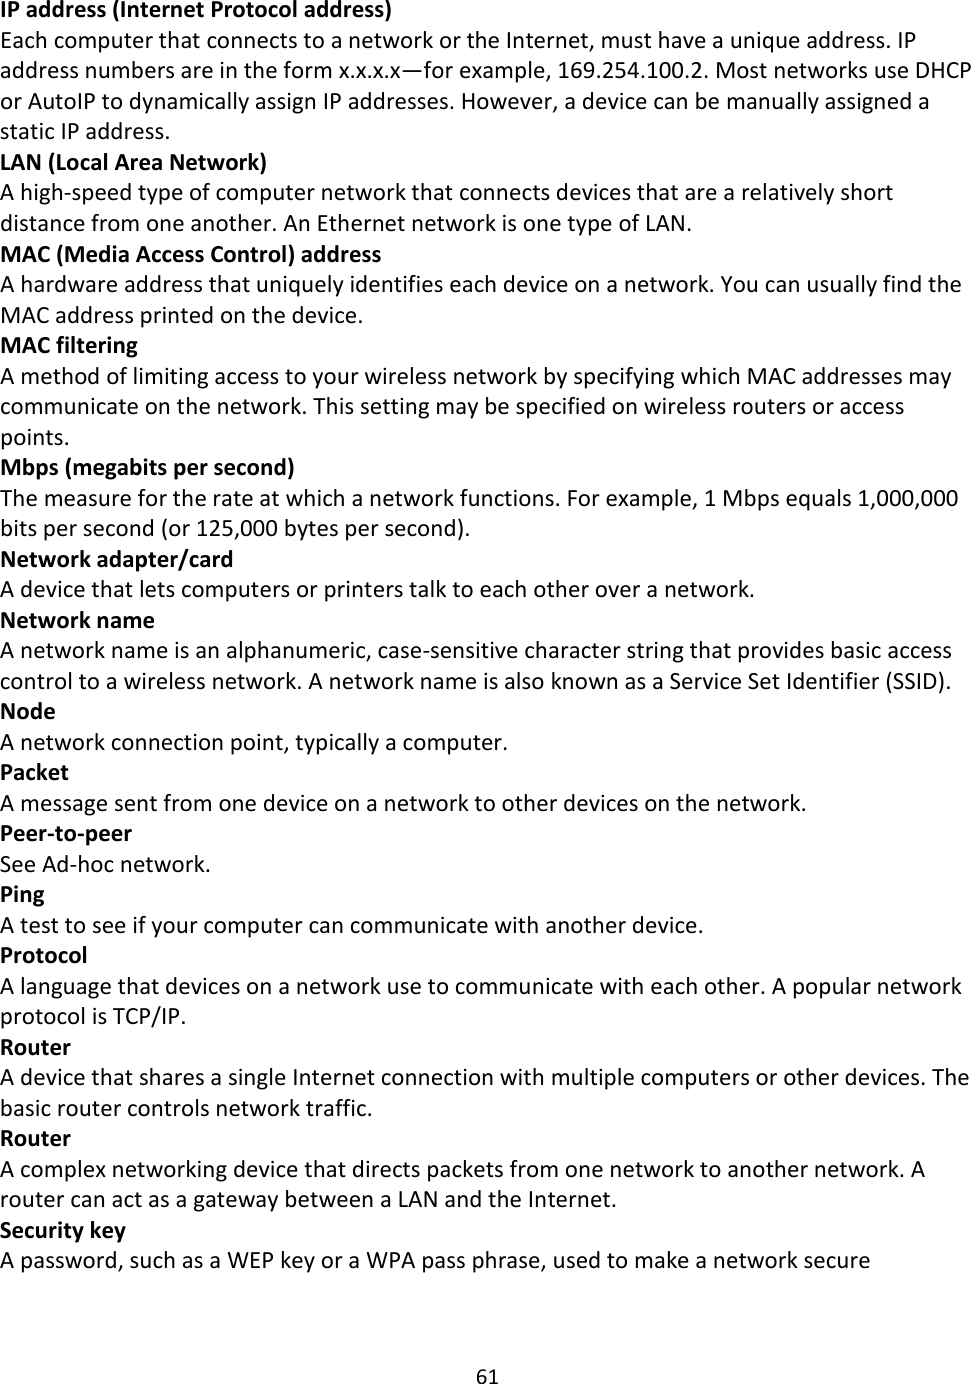 61  IP address (Internet Protocol address) Each computer that connects to a network or the Internet, must have a unique address. IP address numbers are in the form x.x.x.x—for example, 169.254.100.2. Most networks use DHCP or AutoIP to dynamically assign IP addresses. However, a device can be manually assigned a static IP address. LAN (Local Area Network) A high-speed type of computer network that connects devices that are a relatively short distance from one another. An Ethernet network is one type of LAN. MAC (Media Access Control) address A hardware address that uniquely identifies each device on a network. You can usually find the MAC address printed on the device. MAC filtering A method of limiting access to your wireless network by specifying which MAC addresses may communicate on the network. This setting may be specified on wireless routers or access points. Mbps (megabits per second) The measure for the rate at which a network functions. For example, 1 Mbps equals 1,000,000 bits per second (or 125,000 bytes per second). Network adapter/card A device that lets computers or printers talk to each other over a network. Network name A network name is an alphanumeric, case-sensitive character string that provides basic access control to a wireless network. A network name is also known as a Service Set Identifier (SSID). Node A network connection point, typically a computer. Packet A message sent from one device on a network to other devices on the network. Peer-to-peer See Ad-hoc network. Ping A test to see if your computer can communicate with another device. Protocol A language that devices on a network use to communicate with each other. A popular network protocol is TCP/IP. Router A device that shares a single Internet connection with multiple computers or other devices. The basic router controls network traffic. Router A complex networking device that directs packets from one network to another network. A router can act as a gateway between a LAN and the Internet. Security key A password, such as a WEP key or a WPA pass phrase, used to make a network secure   